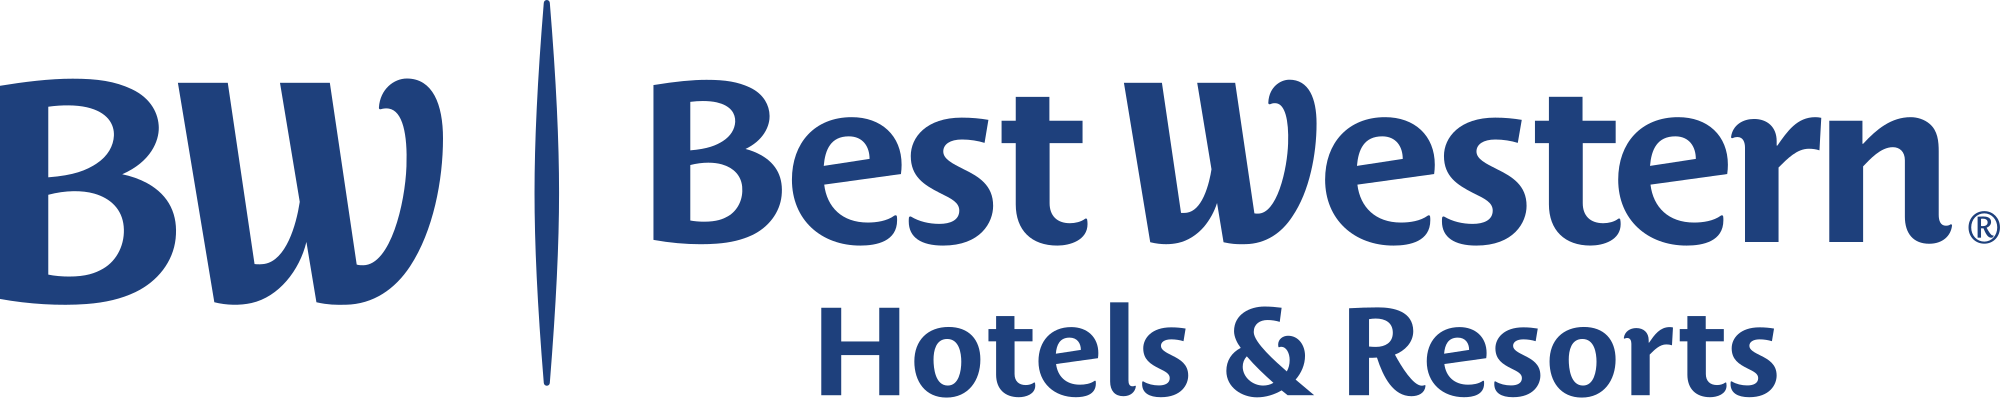 Best Western Hotel: Stay 2 Nights and Get a Free Night for Your Next Stay